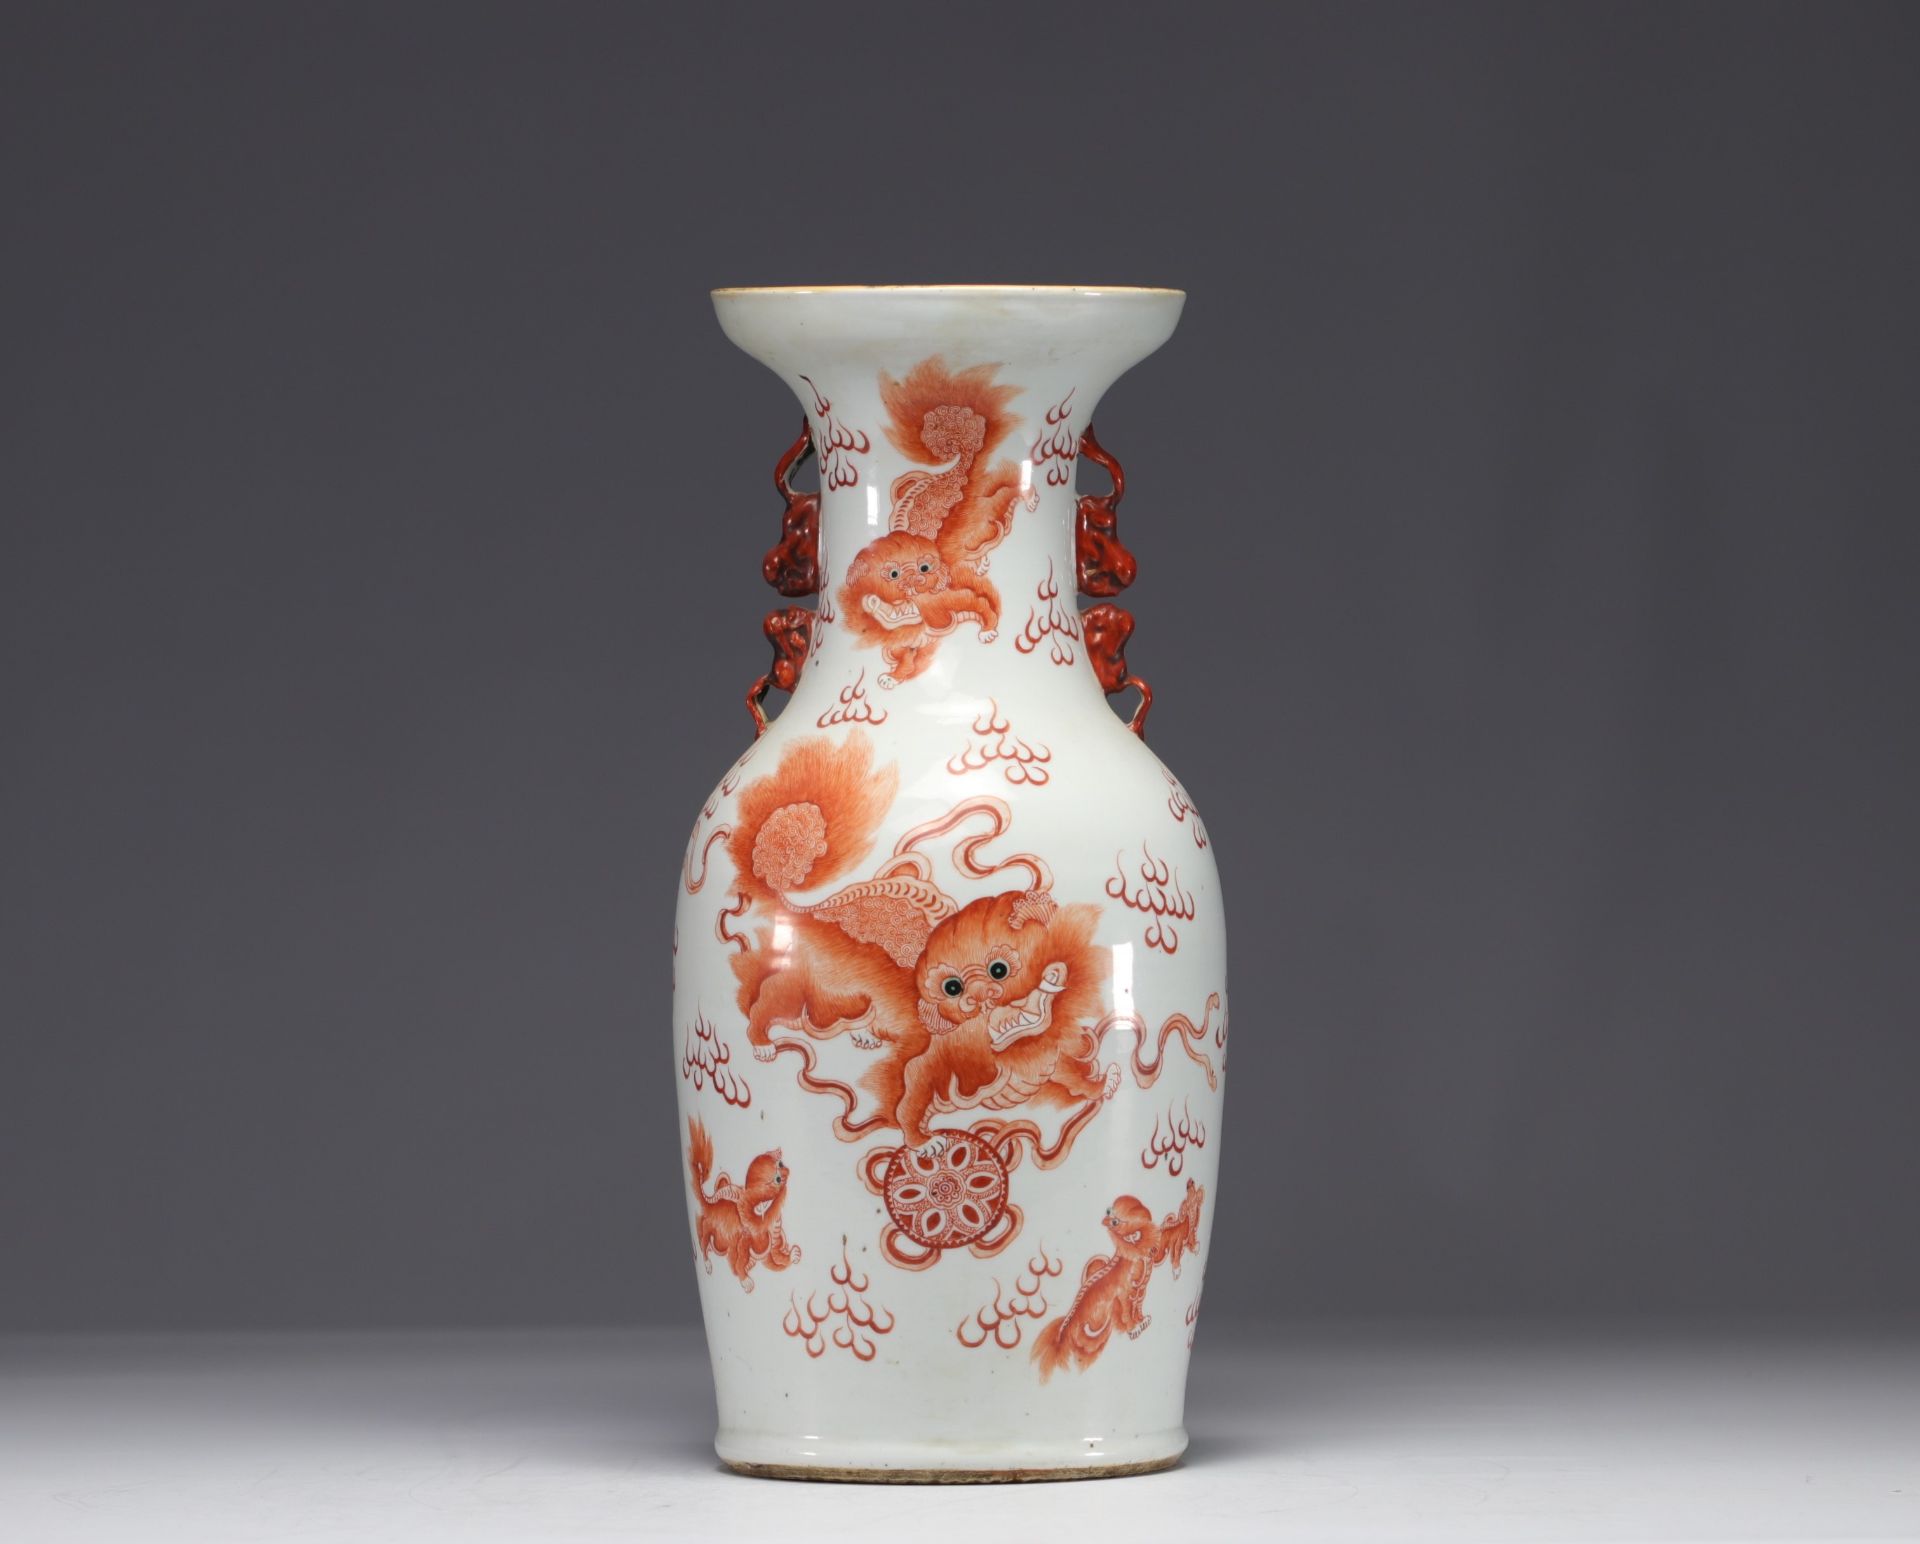 China - Porcelain vase decorated with iron-red Lions, 19th century.